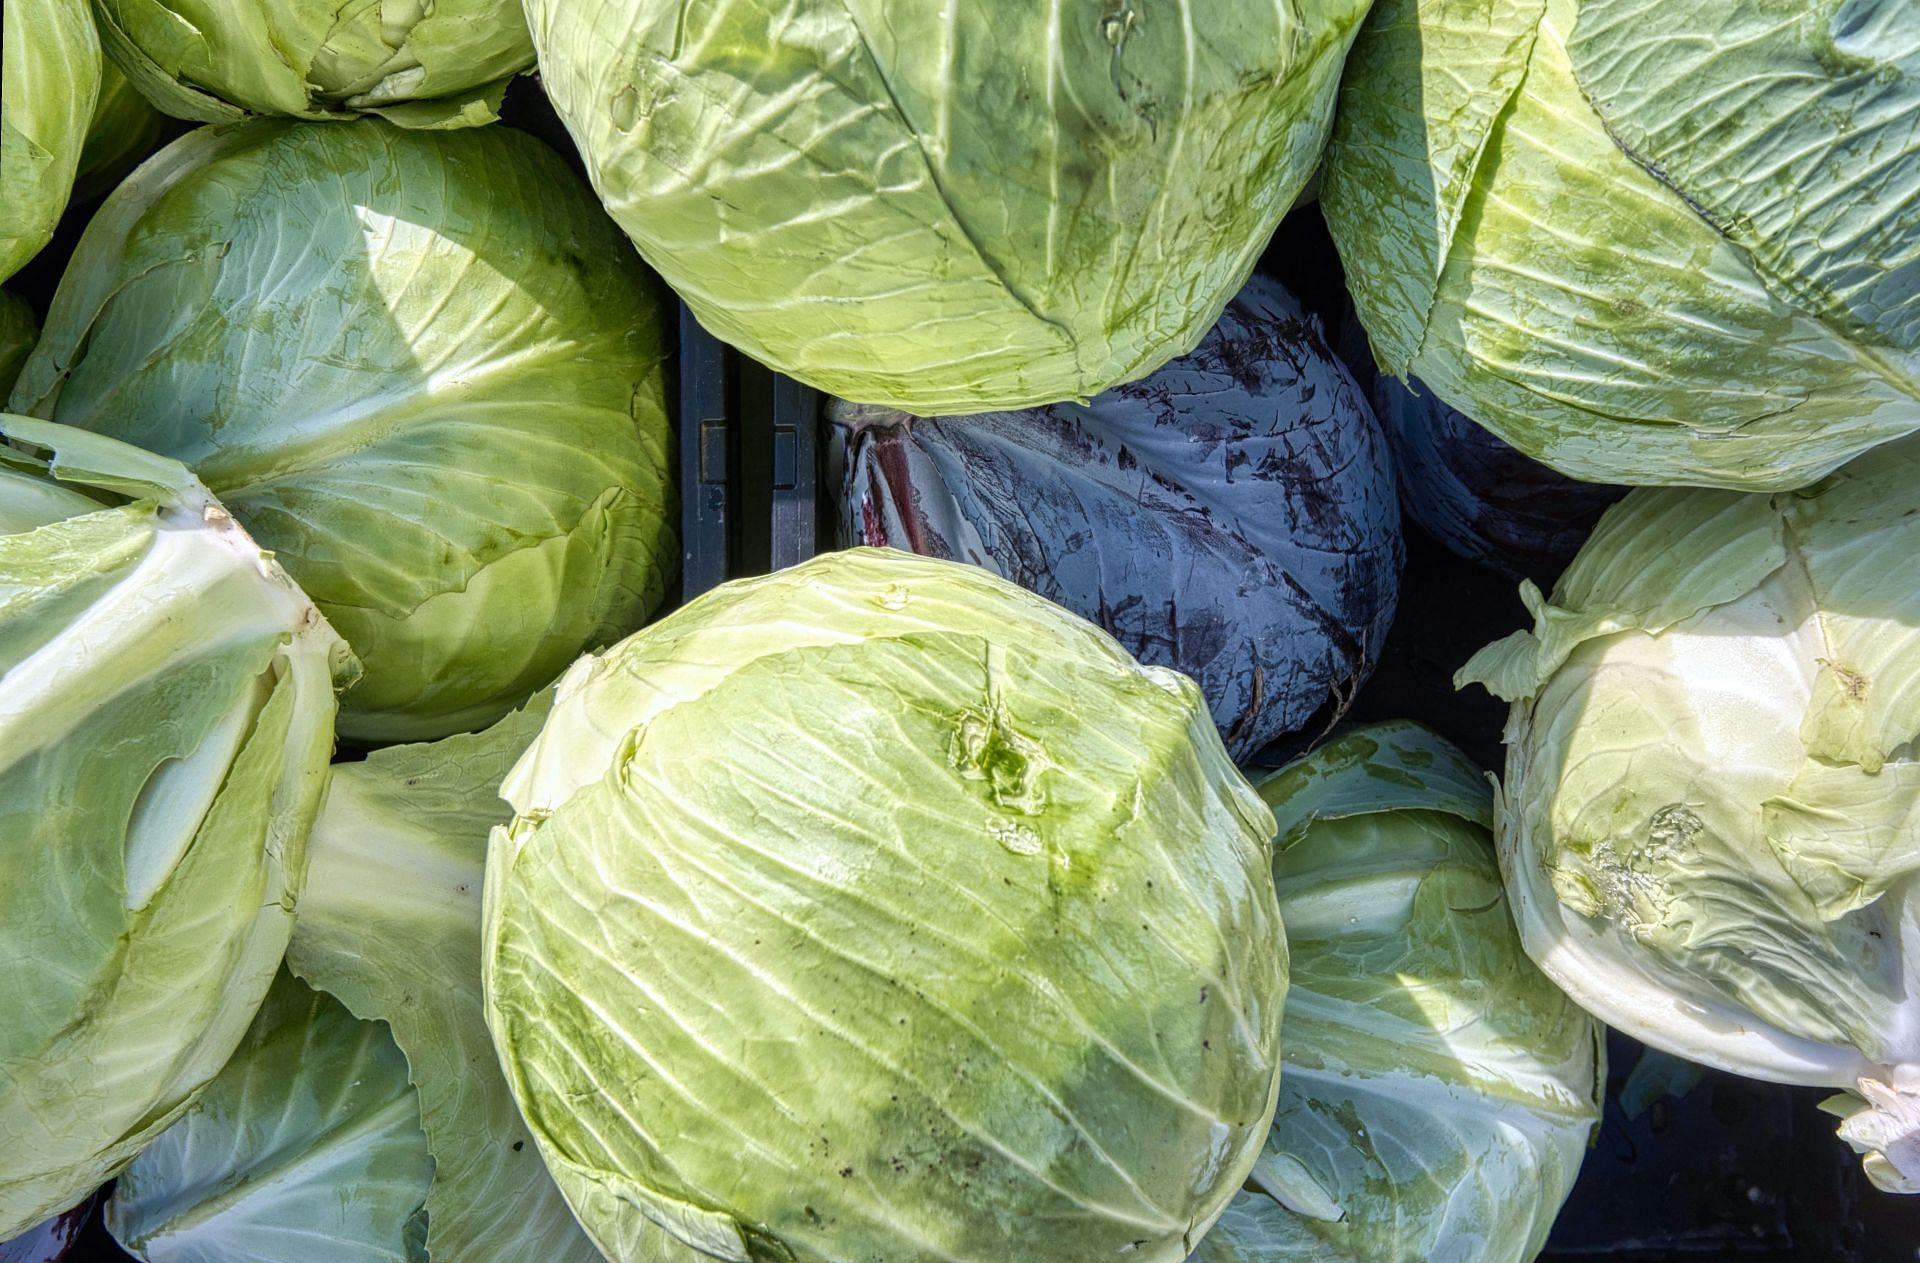 All you needed to know about the nutrition in cabbage (Image via Unsplash/Eric Prouzet)